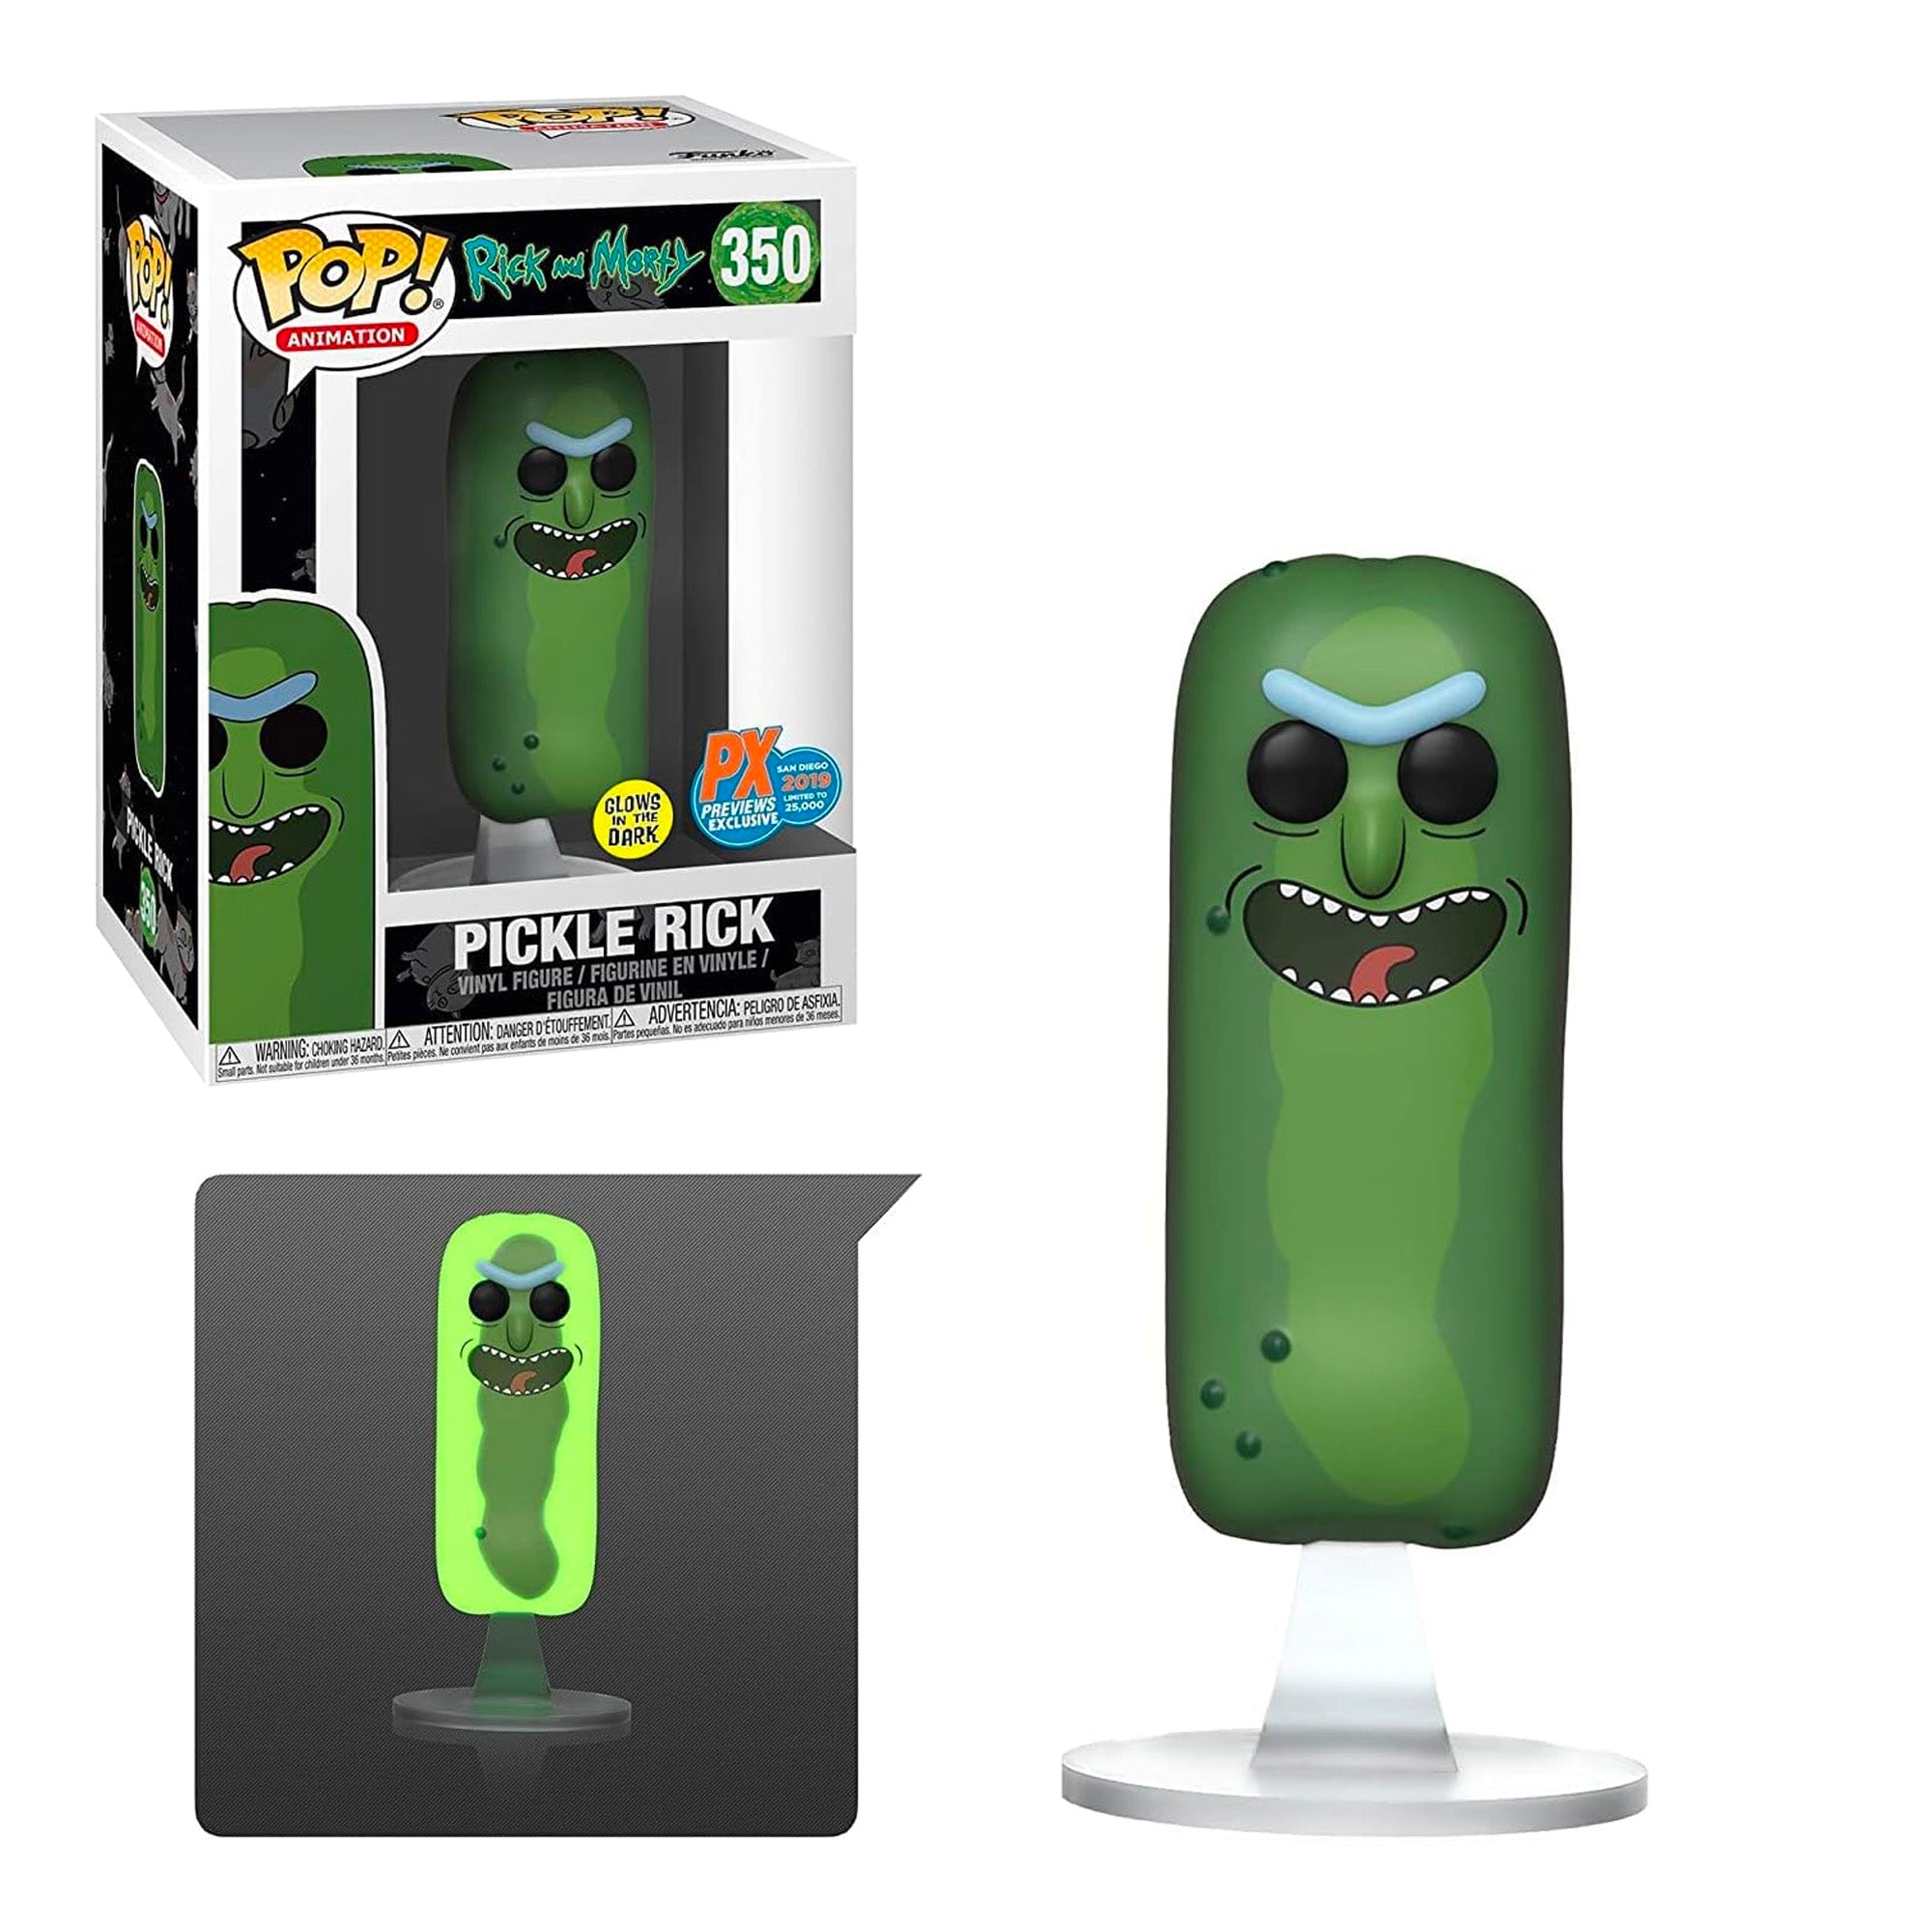 POP! RICK AND MORTY – TOY TOKYO